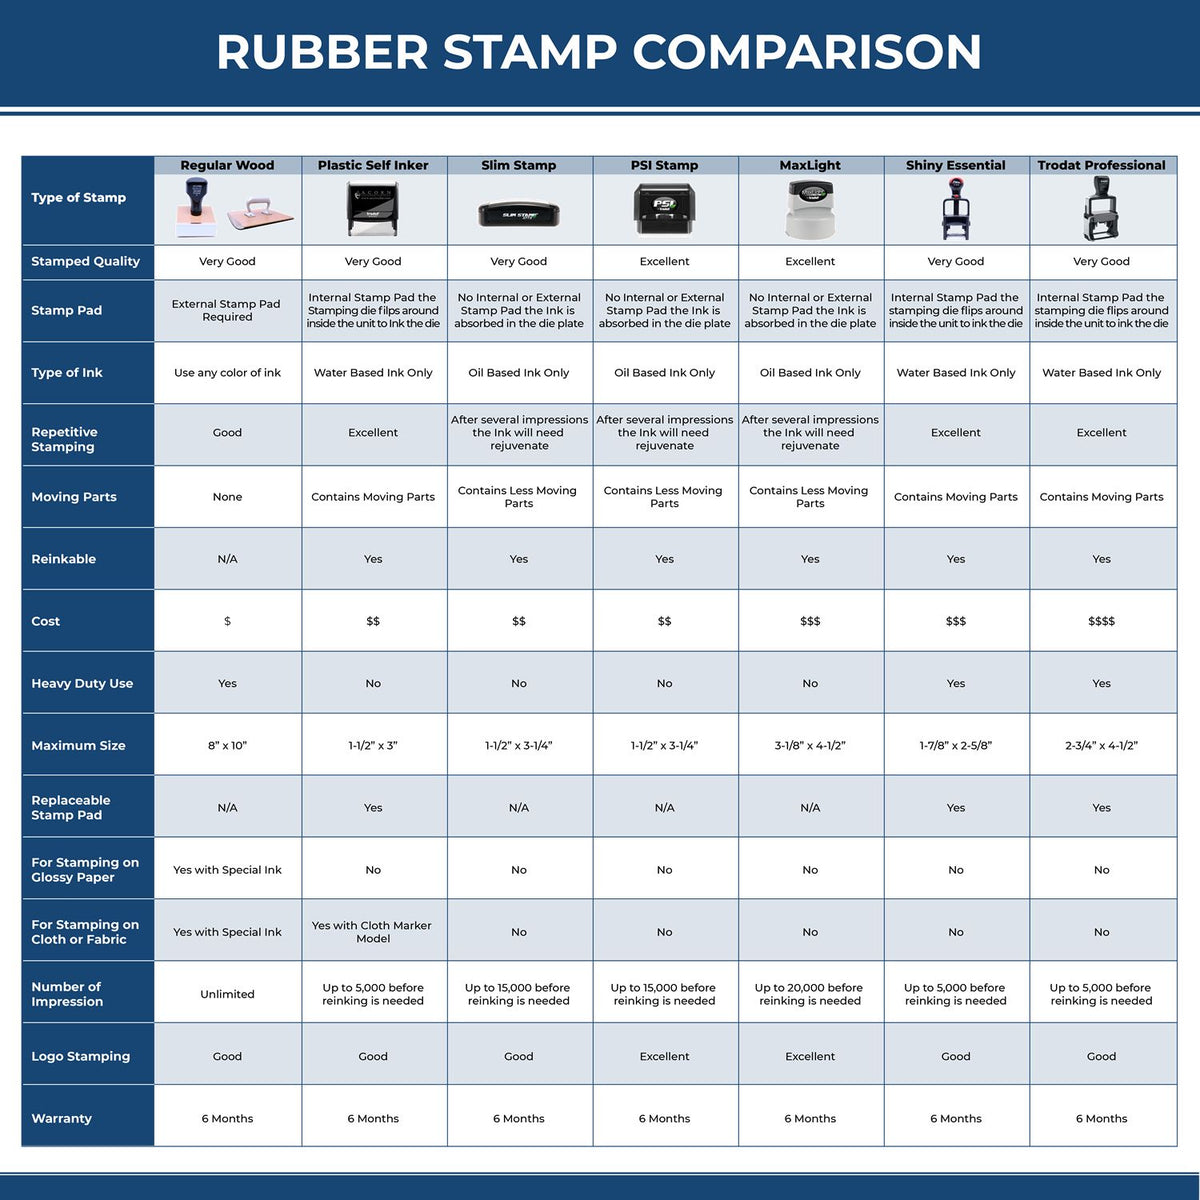 Large Self-Inking Bold Completed Stamp 4887S Rubber Stamp Comparison